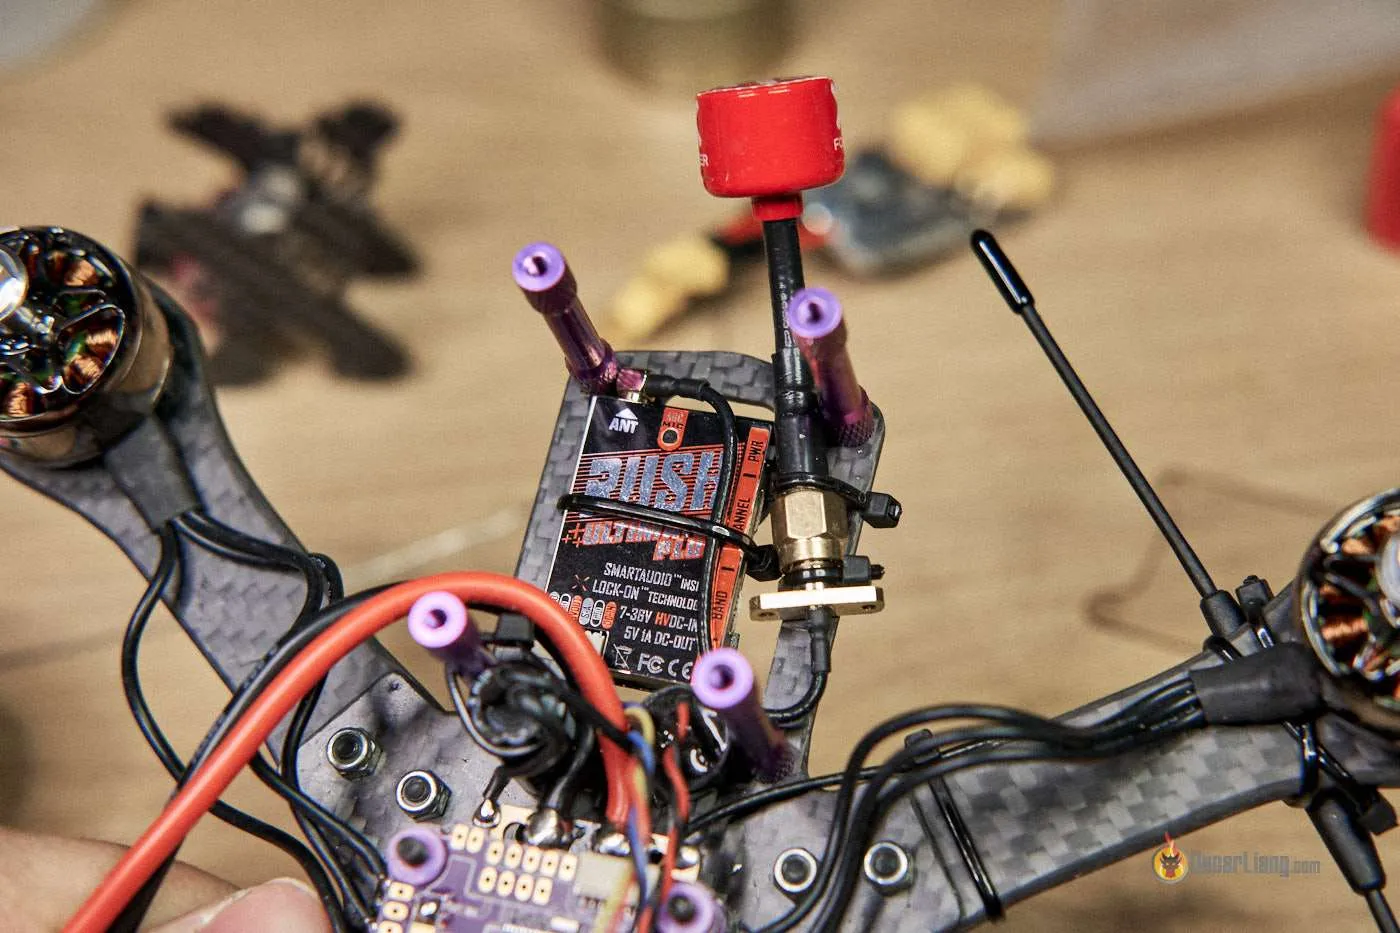 Selecting the Finest VTX (Video Transmitter) for FPV Drones – The Final Newbie Information